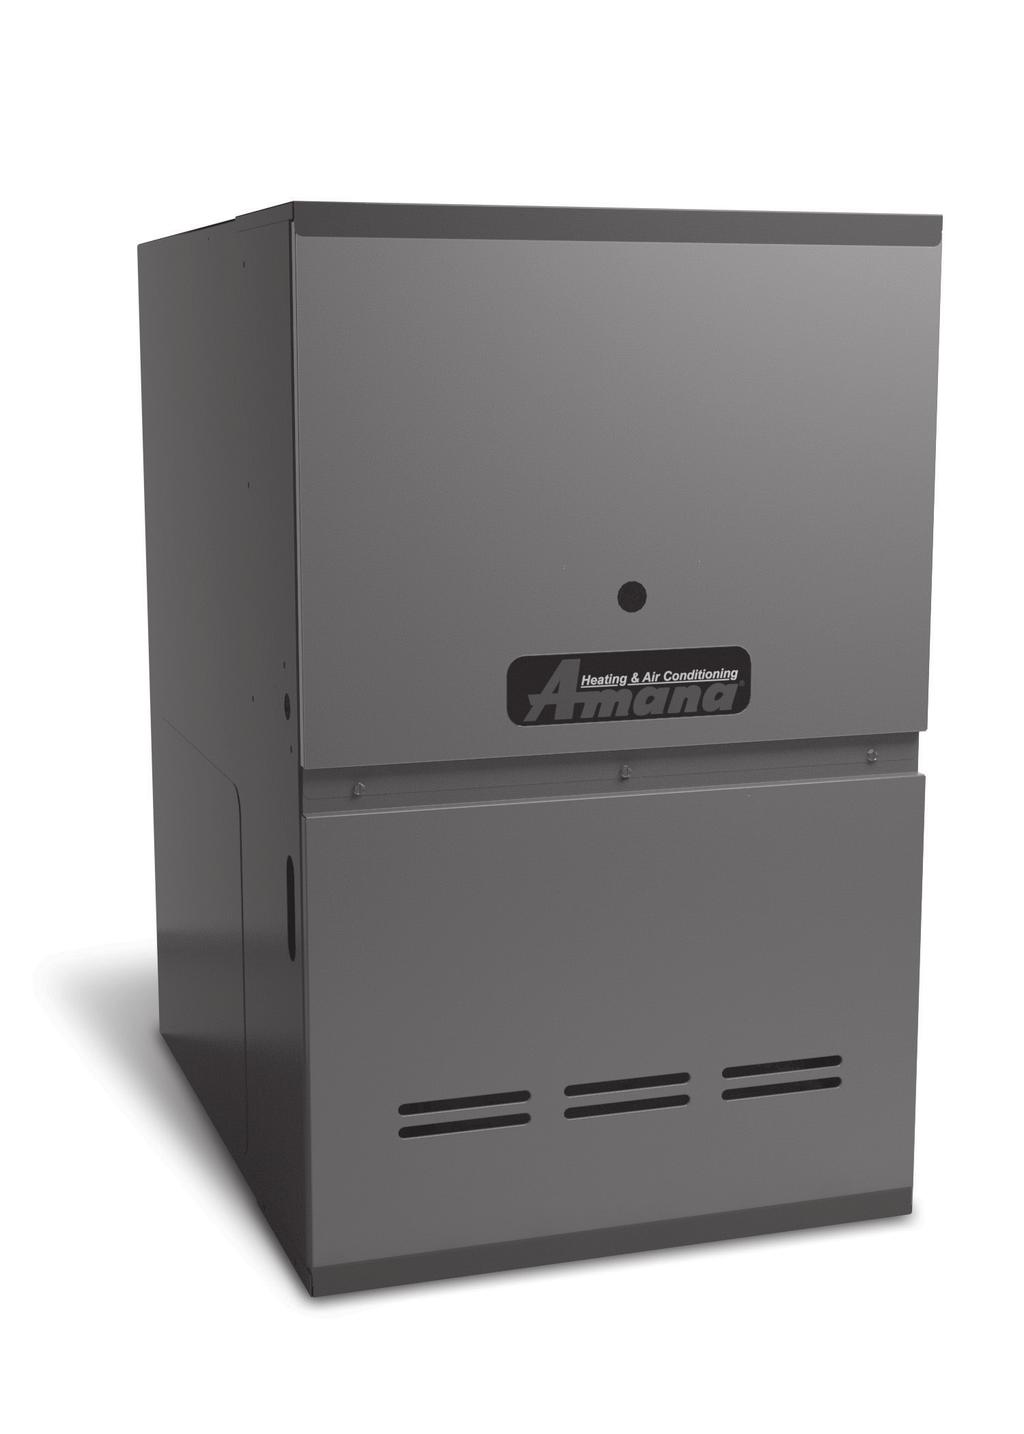 ADSH8 Heating Input: 40,000 100,000 BTU/h Two-Stage Convertible Multi-Speed Gas Furnace 80% AFUE Standard Features Two-stage convertible gas valve automatically adjusts to high or low